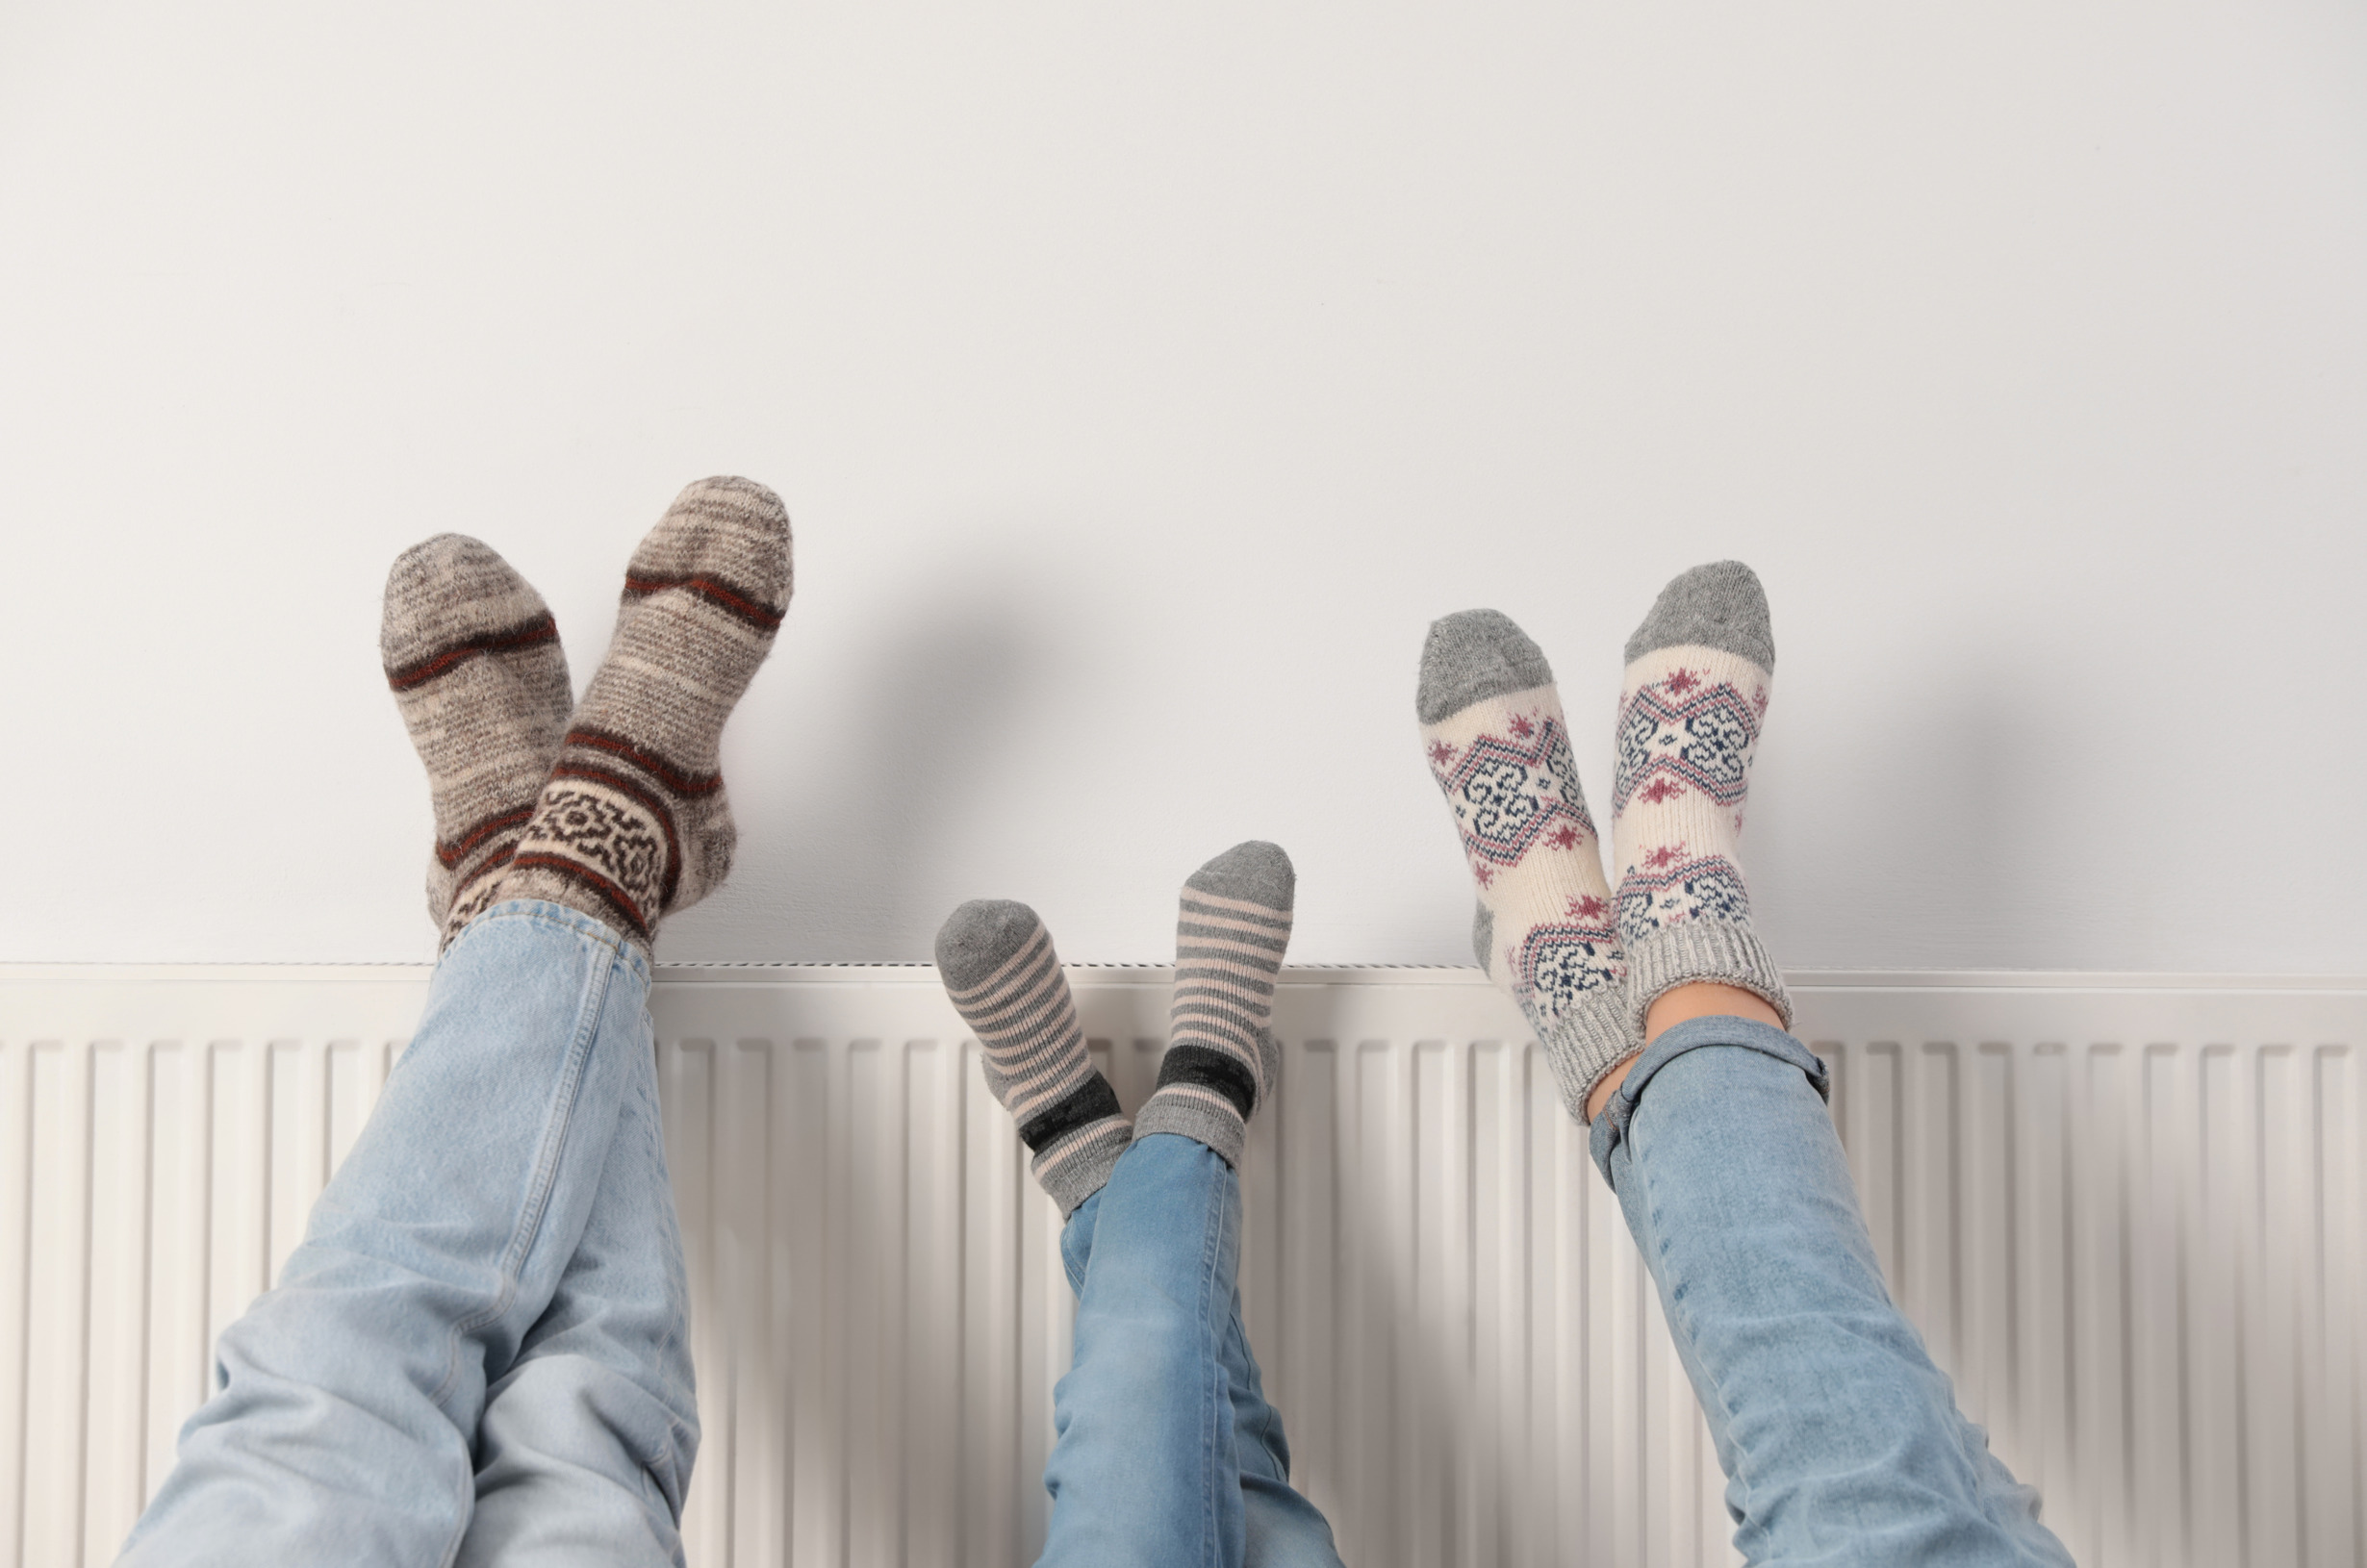 How socks sizes for kids, females, and males differ